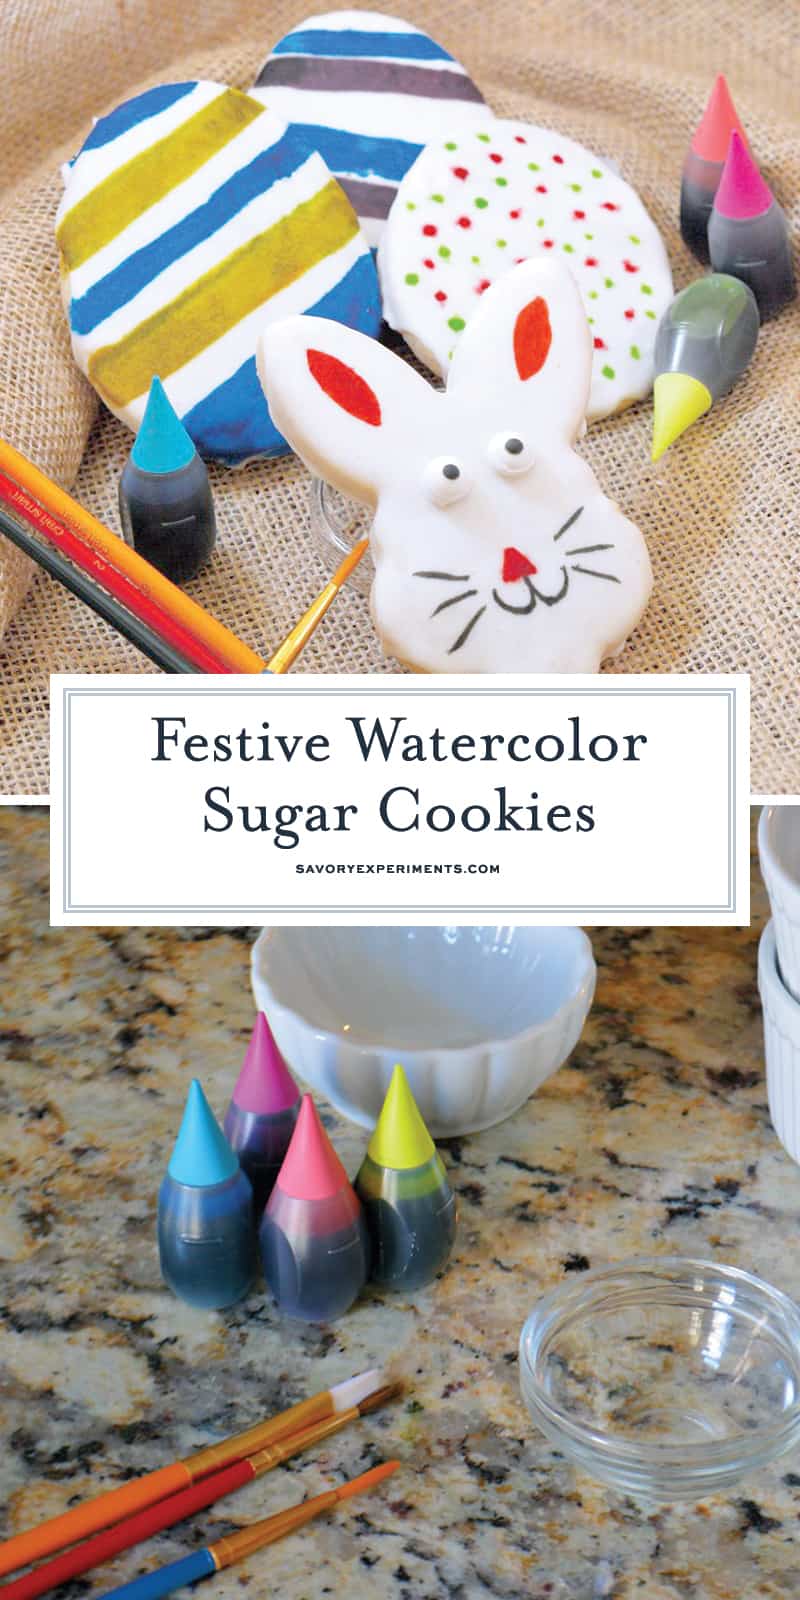 Watercolor Sugar Cookies can be made for any holiday, but I like them best for Easter. Easter Egg Cookies and Bunny Cookies are just so pretty with the soft glow of watercolor! #watercolorsugarcookies #sugarcookiecutouts #eastercookies www.savoryexperiments.com 